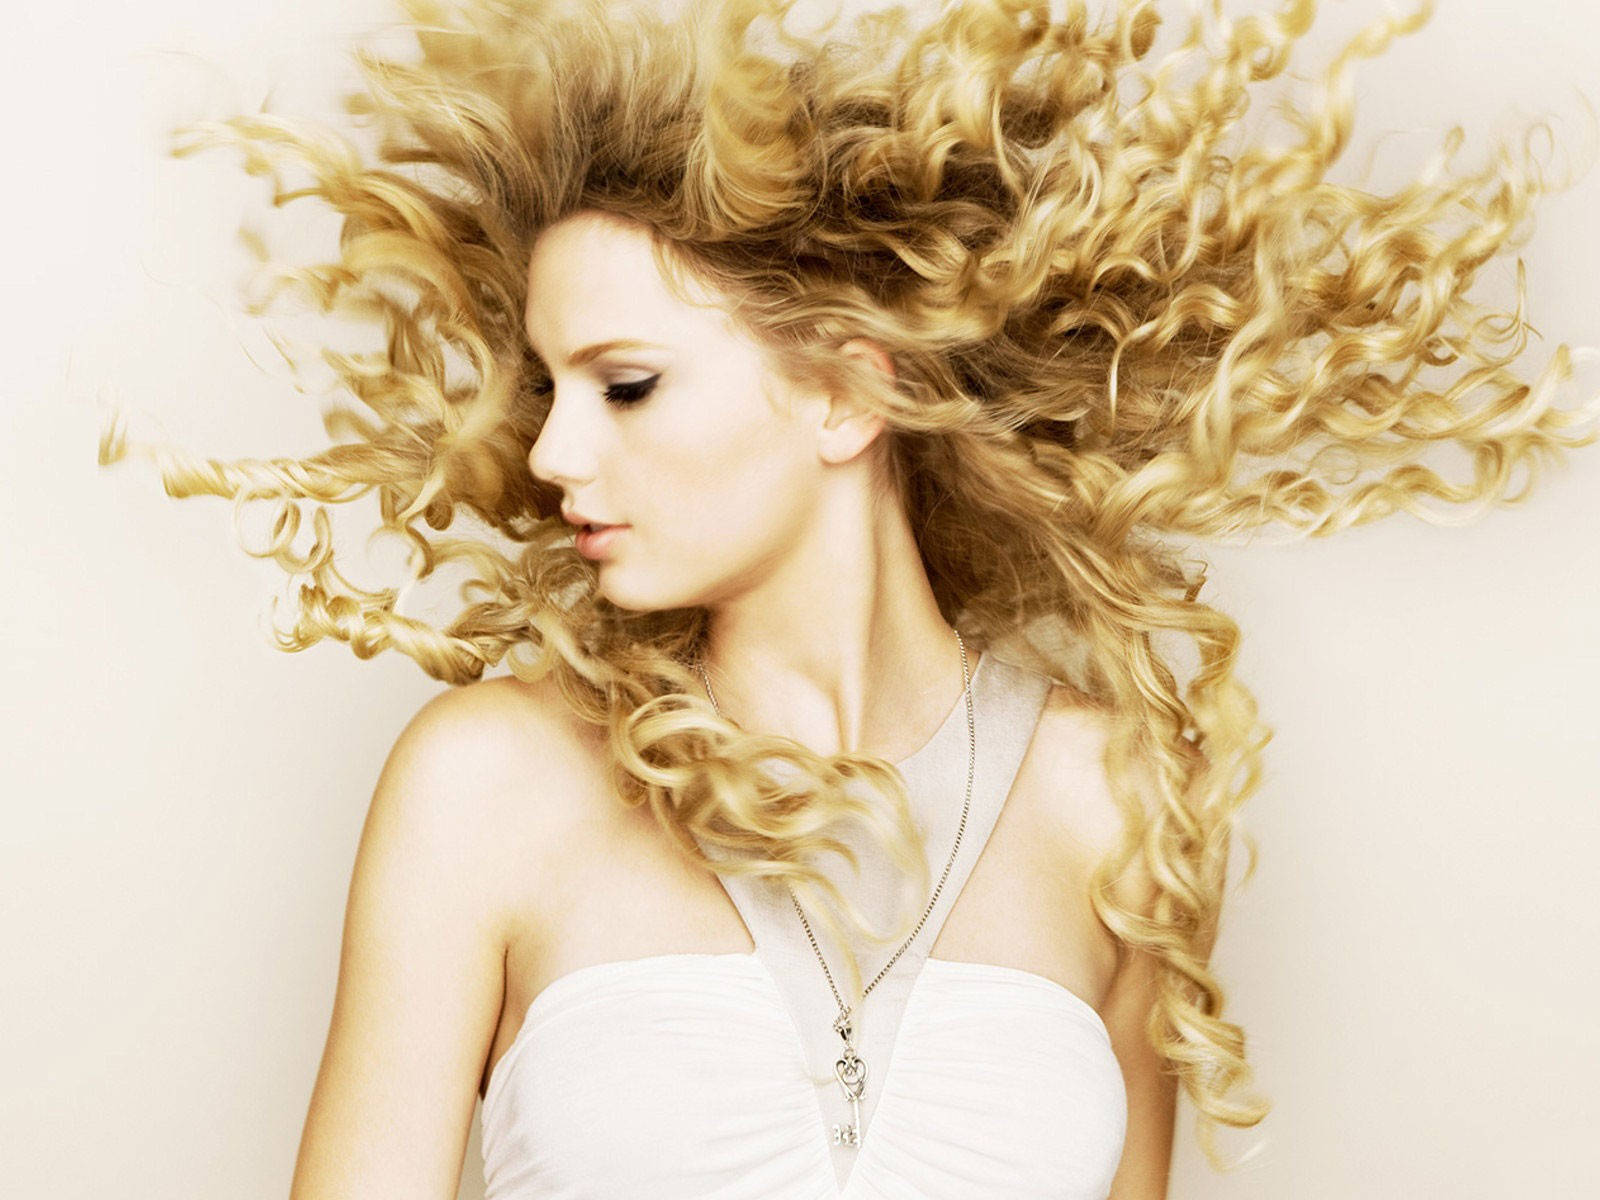 Taylor Swift With A Heavy Curl Hairstyle Wallpaper